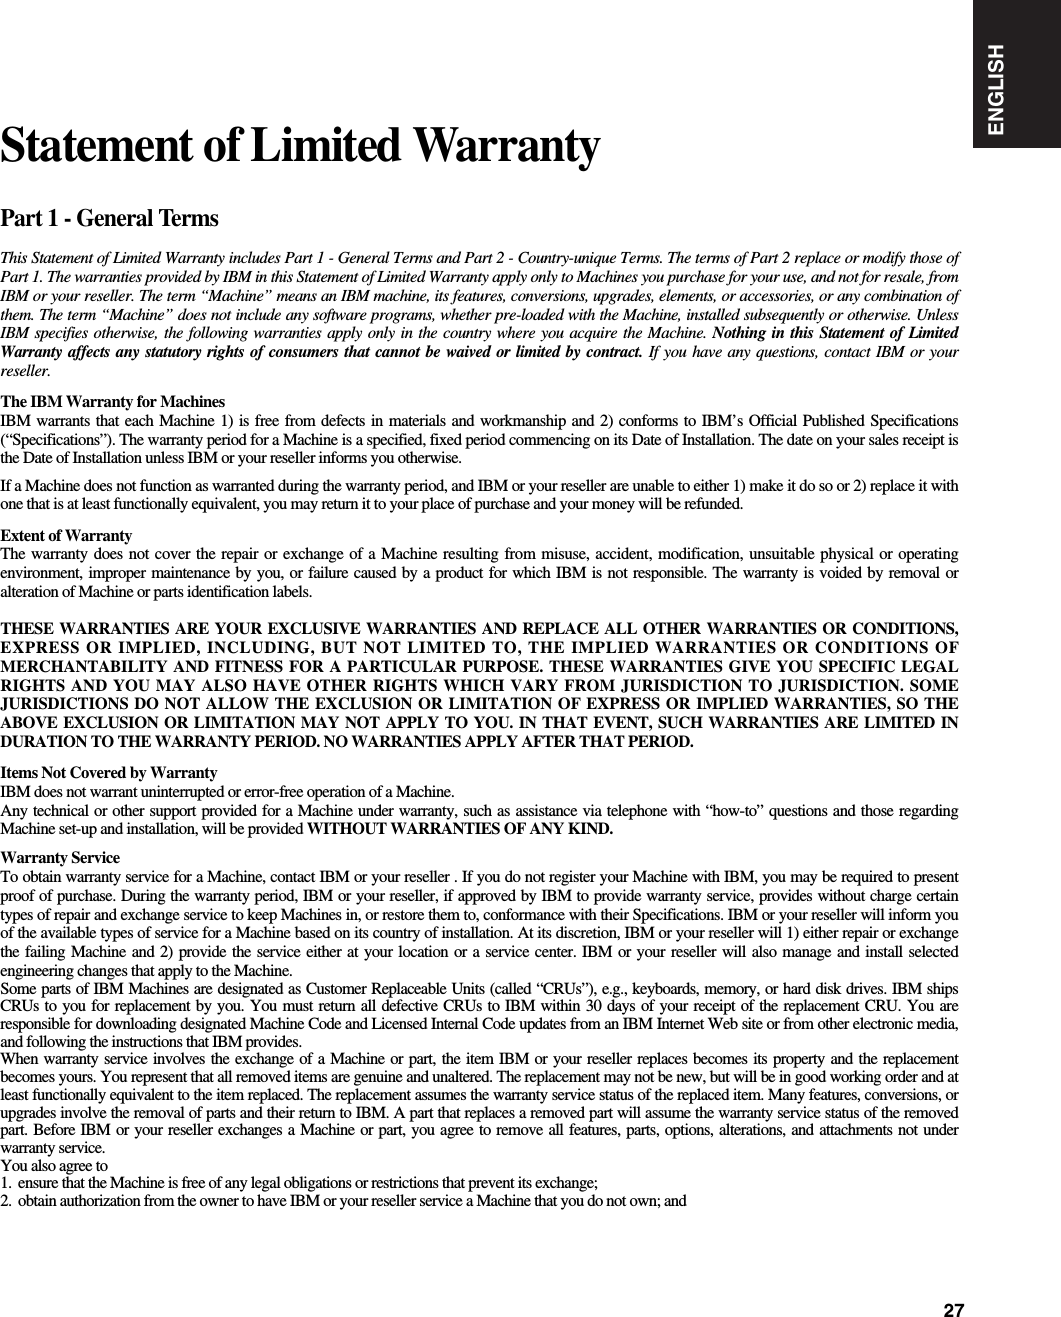 ENGLISH27Part 1 - General TermsThis Statement of Limited Warranty includes Part 1 - General Terms and Part 2 - Country-unique Terms. The terms of Part 2 replace or modify those ofPart 1. The warranties provided by IBM in this Statement of Limited Warranty apply only to Machines you purchase for your use, and not for resale, fromIBM or your reseller. The term “Machine” means an IBM machine, its features, conversions, upgrades, elements, or accessories, or any combination ofthem. The term “Machine” does not include any software programs, whether pre-loaded with the Machine, installed subsequently or otherwise. UnlessIBM specifies otherwise, the following warranties apply only in the country where you acquire the Machine. Nothing in this Statement of LimitedWarranty affects any statutory rights of consumers that cannot be waived or limited by contract. If you have any questions, contact IBM or yourreseller.The IBM Warranty for MachinesIBM warrants that each Machine 1) is free from defects in materials and workmanship and 2) conforms to IBM’s Official Published Specifications(“Specifications”). The warranty period for a Machine is a specified, fixed period commencing on its Date of Installation. The date on your sales receipt isthe Date of Installation unless IBM or your reseller informs you otherwise.If a Machine does not function as warranted during the warranty period, and IBM or your reseller are unable to either 1) make it do so or 2) replace it withone that is at least functionally equivalent, you may return it to your place of purchase and your money will be refunded.Extent of WarrantyThe warranty does not cover the repair or exchange of a Machine resulting from misuse, accident, modification, unsuitable physical or operatingenvironment, improper maintenance by you, or failure caused by a product for which IBM is not responsible. The warranty is voided by removal oralteration of Machine or parts identification labels.THESE WARRANTIES ARE YOUR EXCLUSIVE WARRANTIES AND REPLACE ALL OTHER WARRANTIES OR CONDITIONS,EXPRESS OR IMPLIED, INCLUDING, BUT NOT LIMITED TO, THE IMPLIED WARRANTIES OR CONDITIONS OFMERCHANTABILITY AND FITNESS FOR A PARTICULAR PURPOSE. THESE WARRANTIES GIVE YOU SPECIFIC LEGALRIGHTS AND YOU MAY ALSO HAVE OTHER RIGHTS WHICH VARY FROM JURISDICTION TO JURISDICTION. SOMEJURISDICTIONS DO NOT ALLOW THE EXCLUSION OR LIMITATION OF EXPRESS OR IMPLIED WARRANTIES, SO THEABOVE EXCLUSION OR LIMITATION MAY NOT APPLY TO YOU. IN THAT EVENT, SUCH WARRANTIES ARE LIMITED INDURATION TO THE WARRANTY PERIOD. NO WARRANTIES APPLY AFTER THAT PERIOD.Items Not Covered by WarrantyIBM does not warrant uninterrupted or error-free operation of a Machine.Any technical or other support provided for a Machine under warranty, such as assistance via telephone with “how-to” questions and those regardingMachine set-up and installation, will be provided WITHOUT WARRANTIES OF ANY KIND.Warranty ServiceTo obtain warranty service for a Machine, contact IBM or your reseller . If you do not register your Machine with IBM, you may be required to presentproof of purchase. During the warranty period, IBM or your reseller, if approved by IBM to provide warranty service, provides without charge certaintypes of repair and exchange service to keep Machines in, or restore them to, conformance with their Specifications. IBM or your reseller will inform youof the available types of service for a Machine based on its country of installation. At its discretion, IBM or your reseller will 1) either repair or exchangethe failing Machine and 2) provide the service either at your location or a service center. IBM or your reseller will also manage and install selectedengineering changes that apply to the Machine.Some parts of IBM Machines are designated as Customer Replaceable Units (called “CRUs”), e.g., keyboards, memory, or hard disk drives. IBM shipsCRUs to you for replacement by you. You must return all defective CRUs to IBM within 30 days of your receipt of the replacement CRU. You areresponsible for downloading designated Machine Code and Licensed Internal Code updates from an IBM Internet Web site or from other electronic media,and following the instructions that IBM provides.When warranty service involves the exchange of a Machine or part, the item IBM or your reseller replaces becomes its property and the replacementbecomes yours. You represent that all removed items are genuine and unaltered. The replacement may not be new, but will be in good working order and atleast functionally equivalent to the item replaced. The replacement assumes the warranty service status of the replaced item. Many features, conversions, orupgrades involve the removal of parts and their return to IBM. A part that replaces a removed part will assume the warranty service status of the removedpart. Before IBM or your reseller exchanges a Machine or part, you agree to remove all features, parts, options, alterations, and attachments not underwarranty service.You also agree to1. ensure that the Machine is free of any legal obligations or restrictions that prevent its exchange;2. obtain authorization from the owner to have IBM or your reseller service a Machine that you do not own; andStatement of Limited Warranty